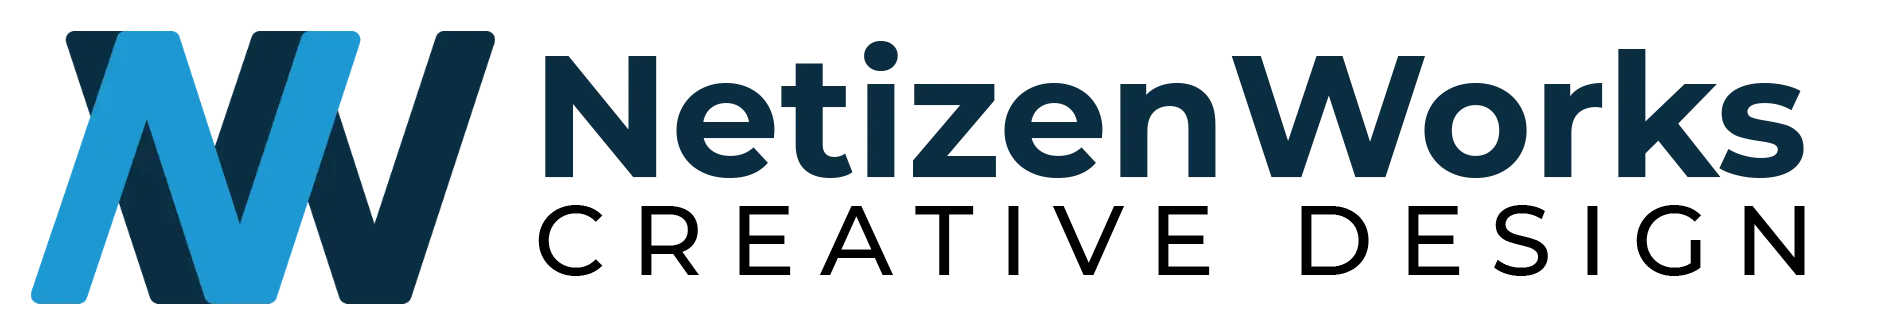 logo2020withtext